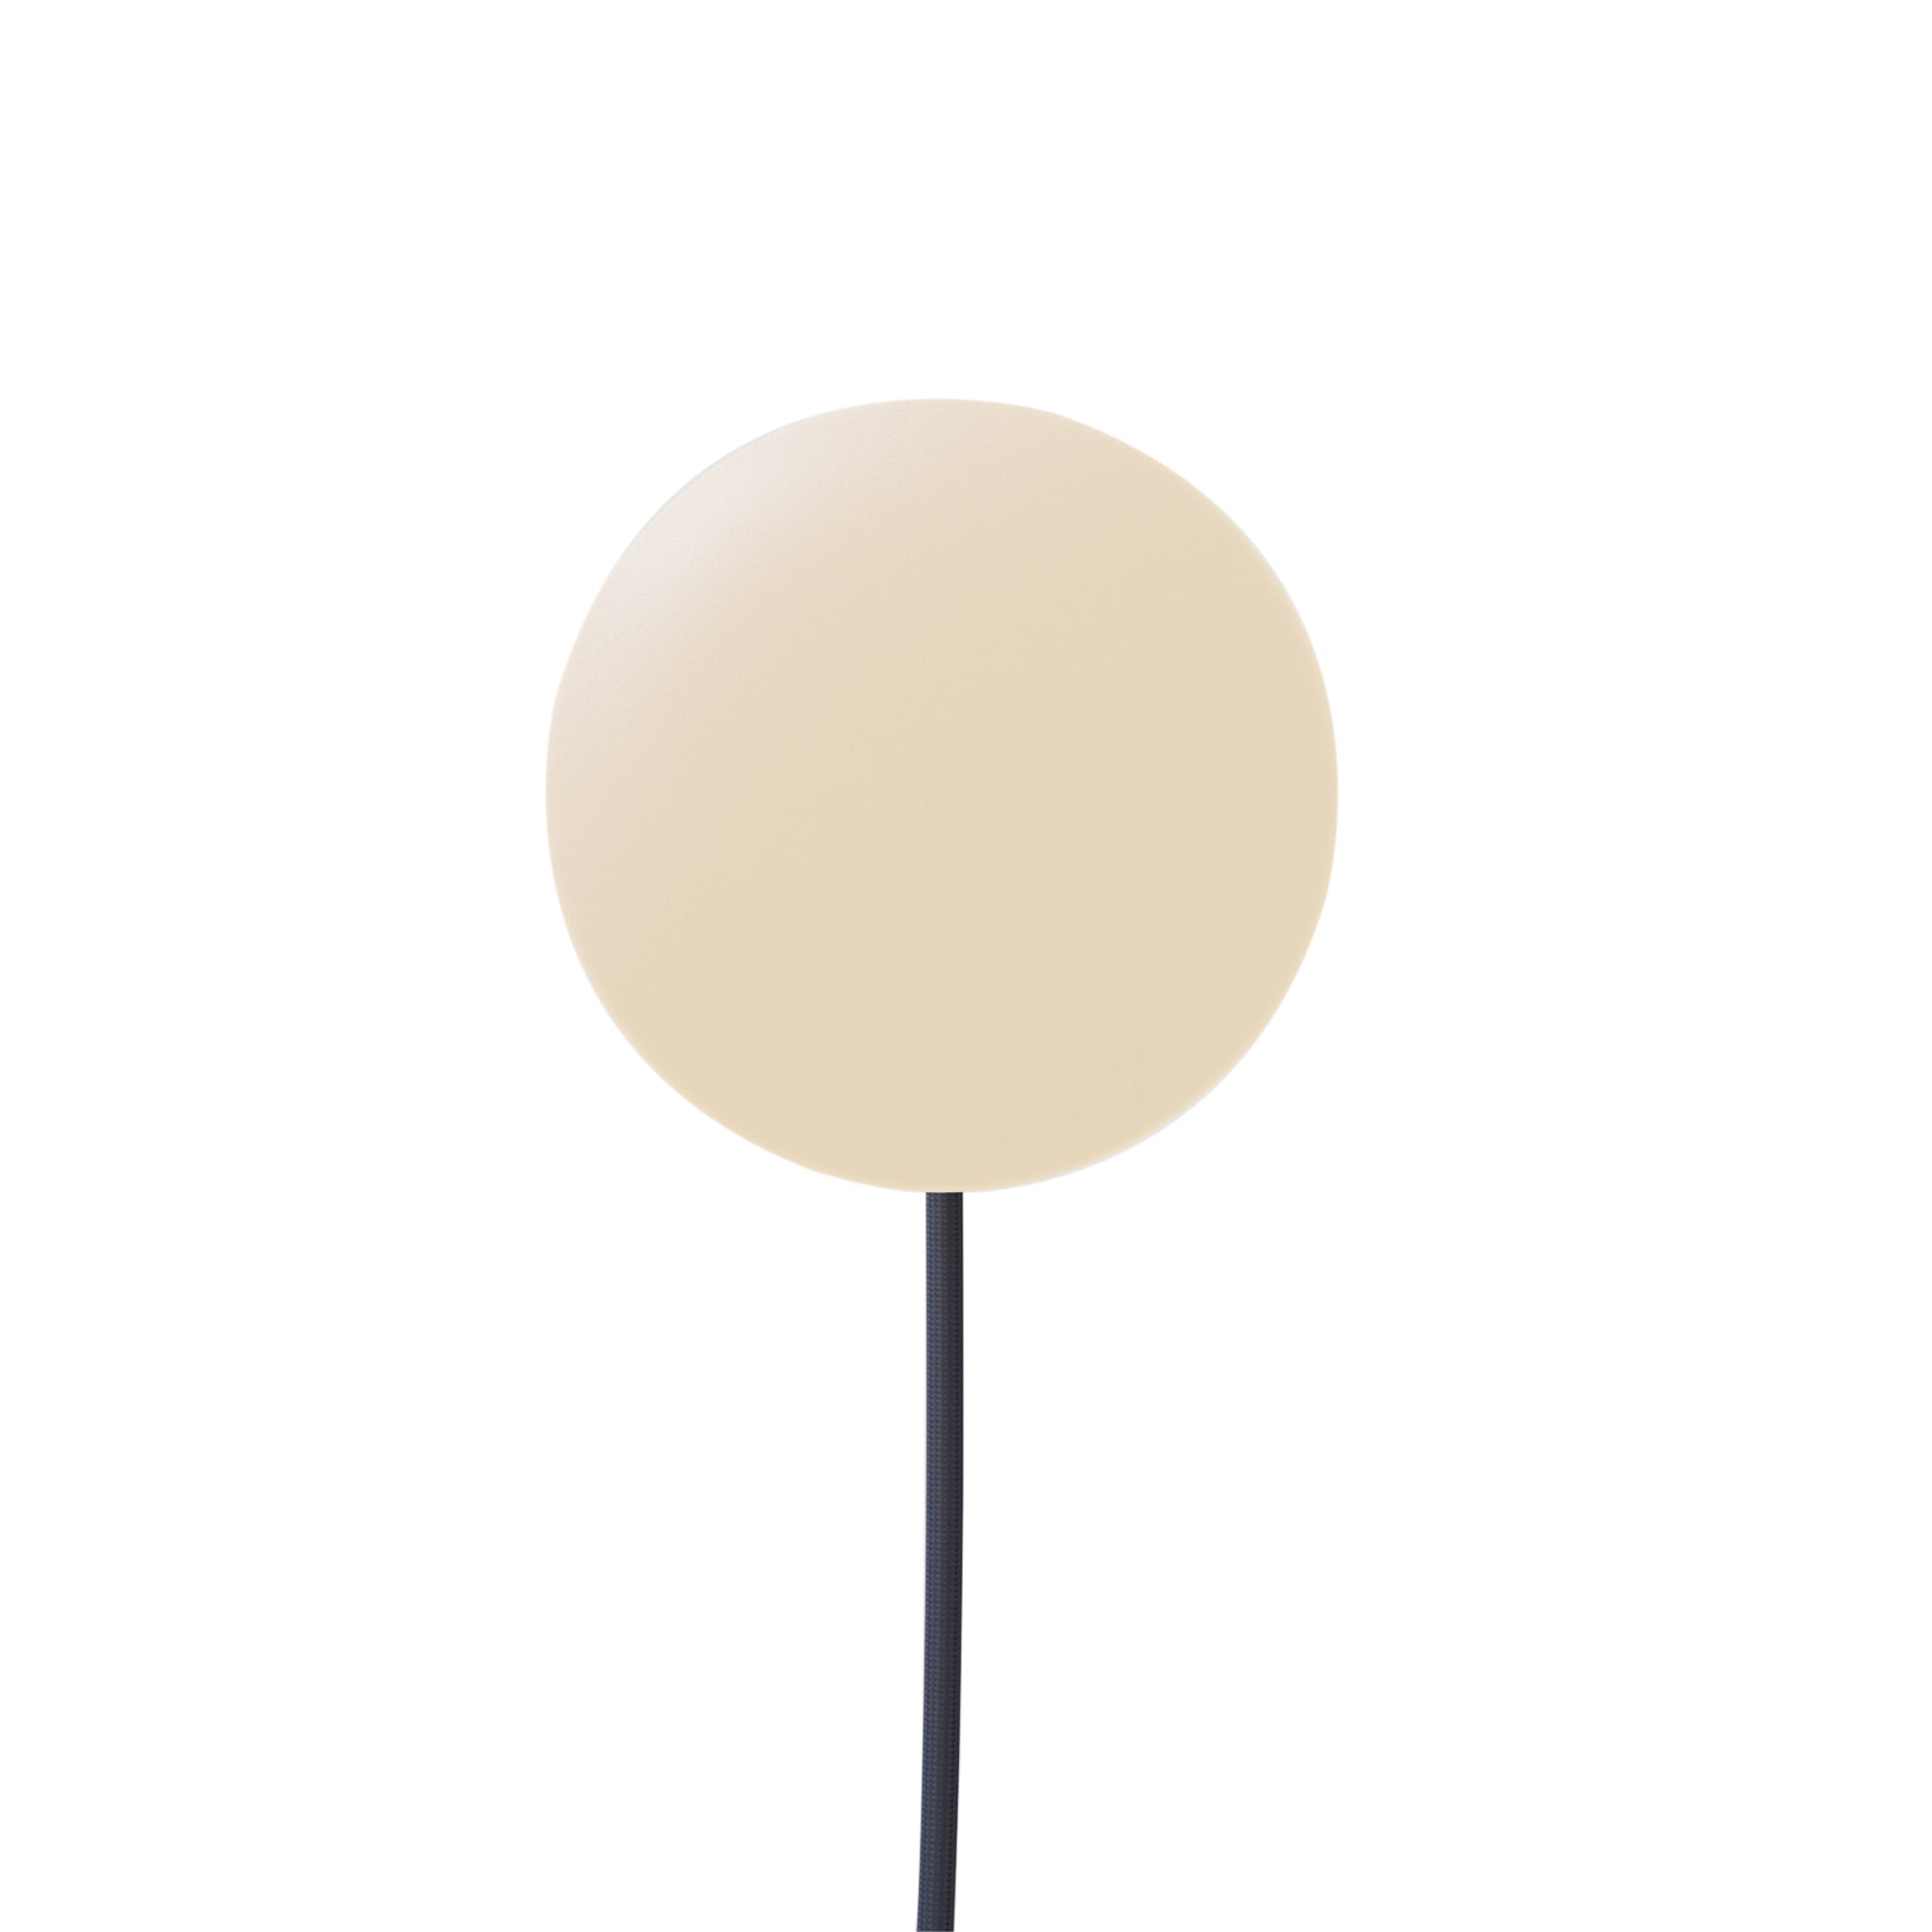 Parc 01 Table Lamp: Handswitch + Midnight Blue